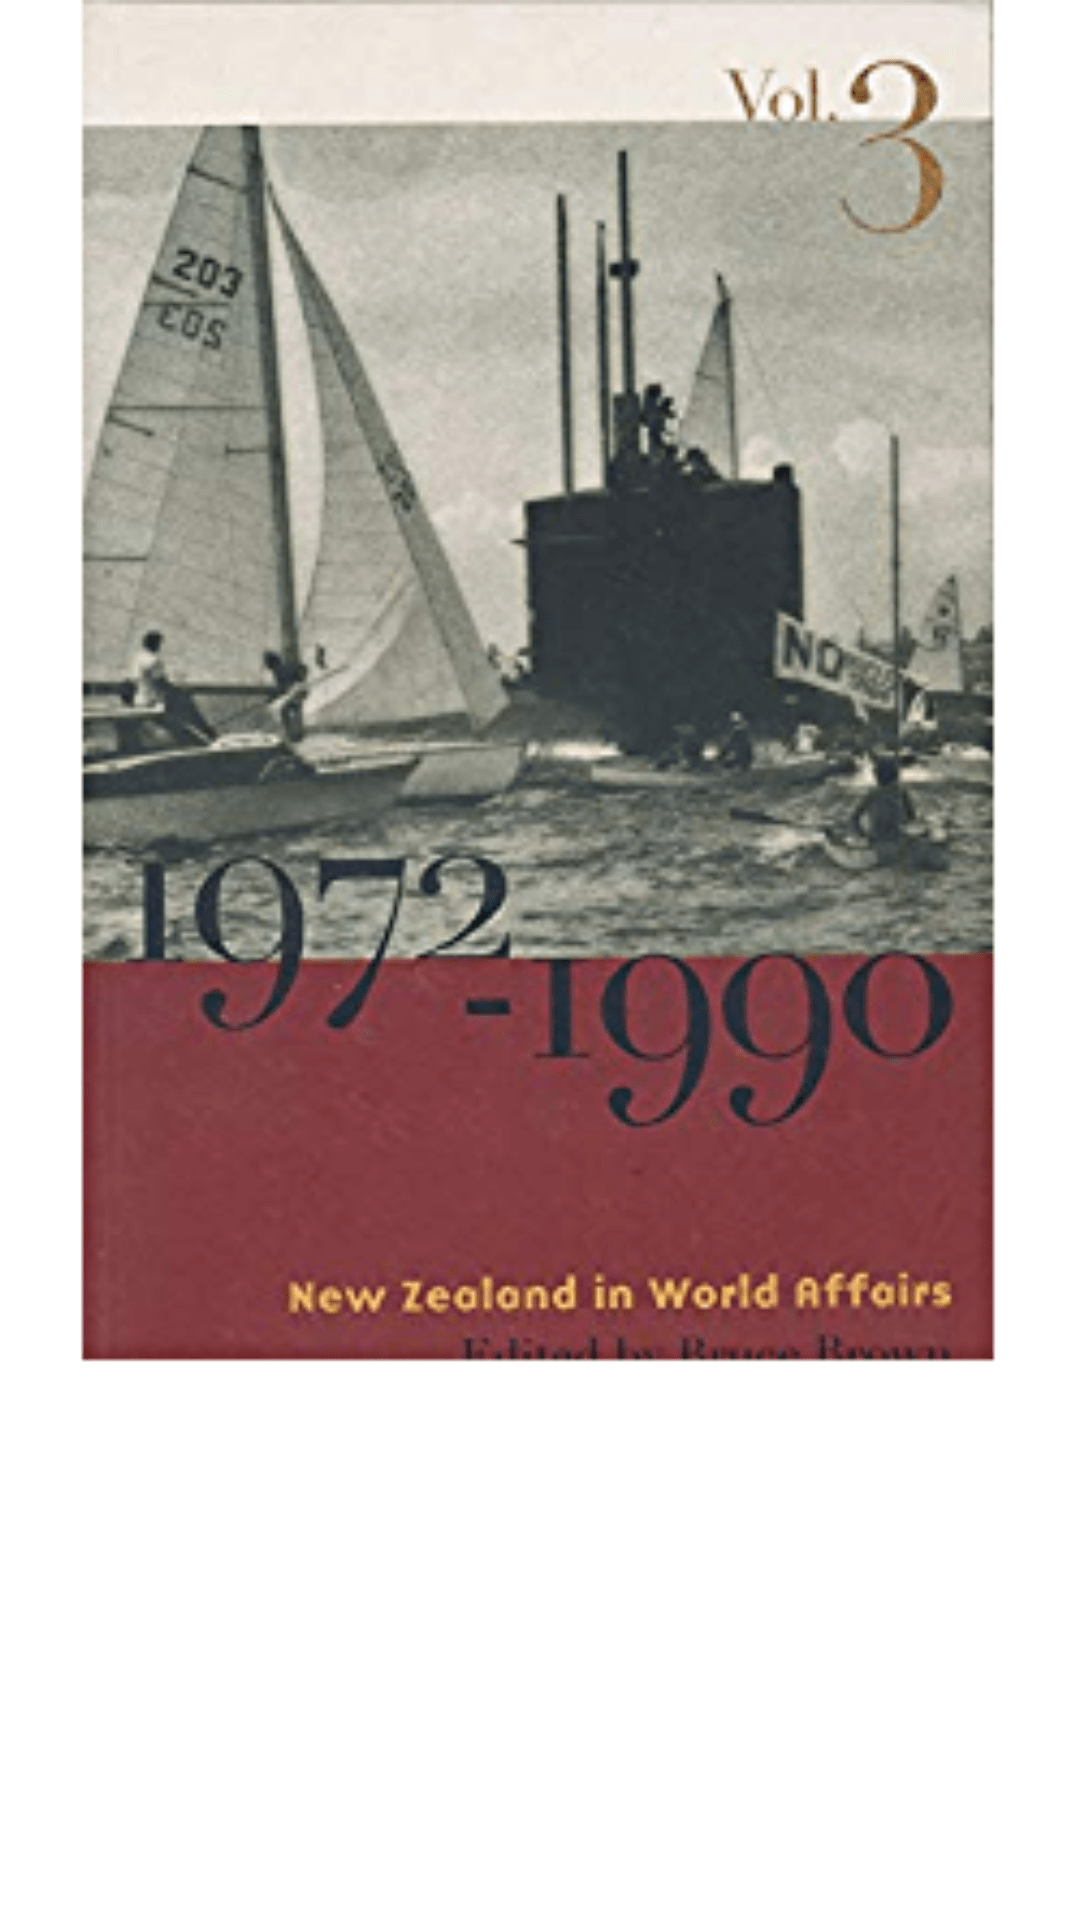 New Zealand in World Affairs: 1972-1990